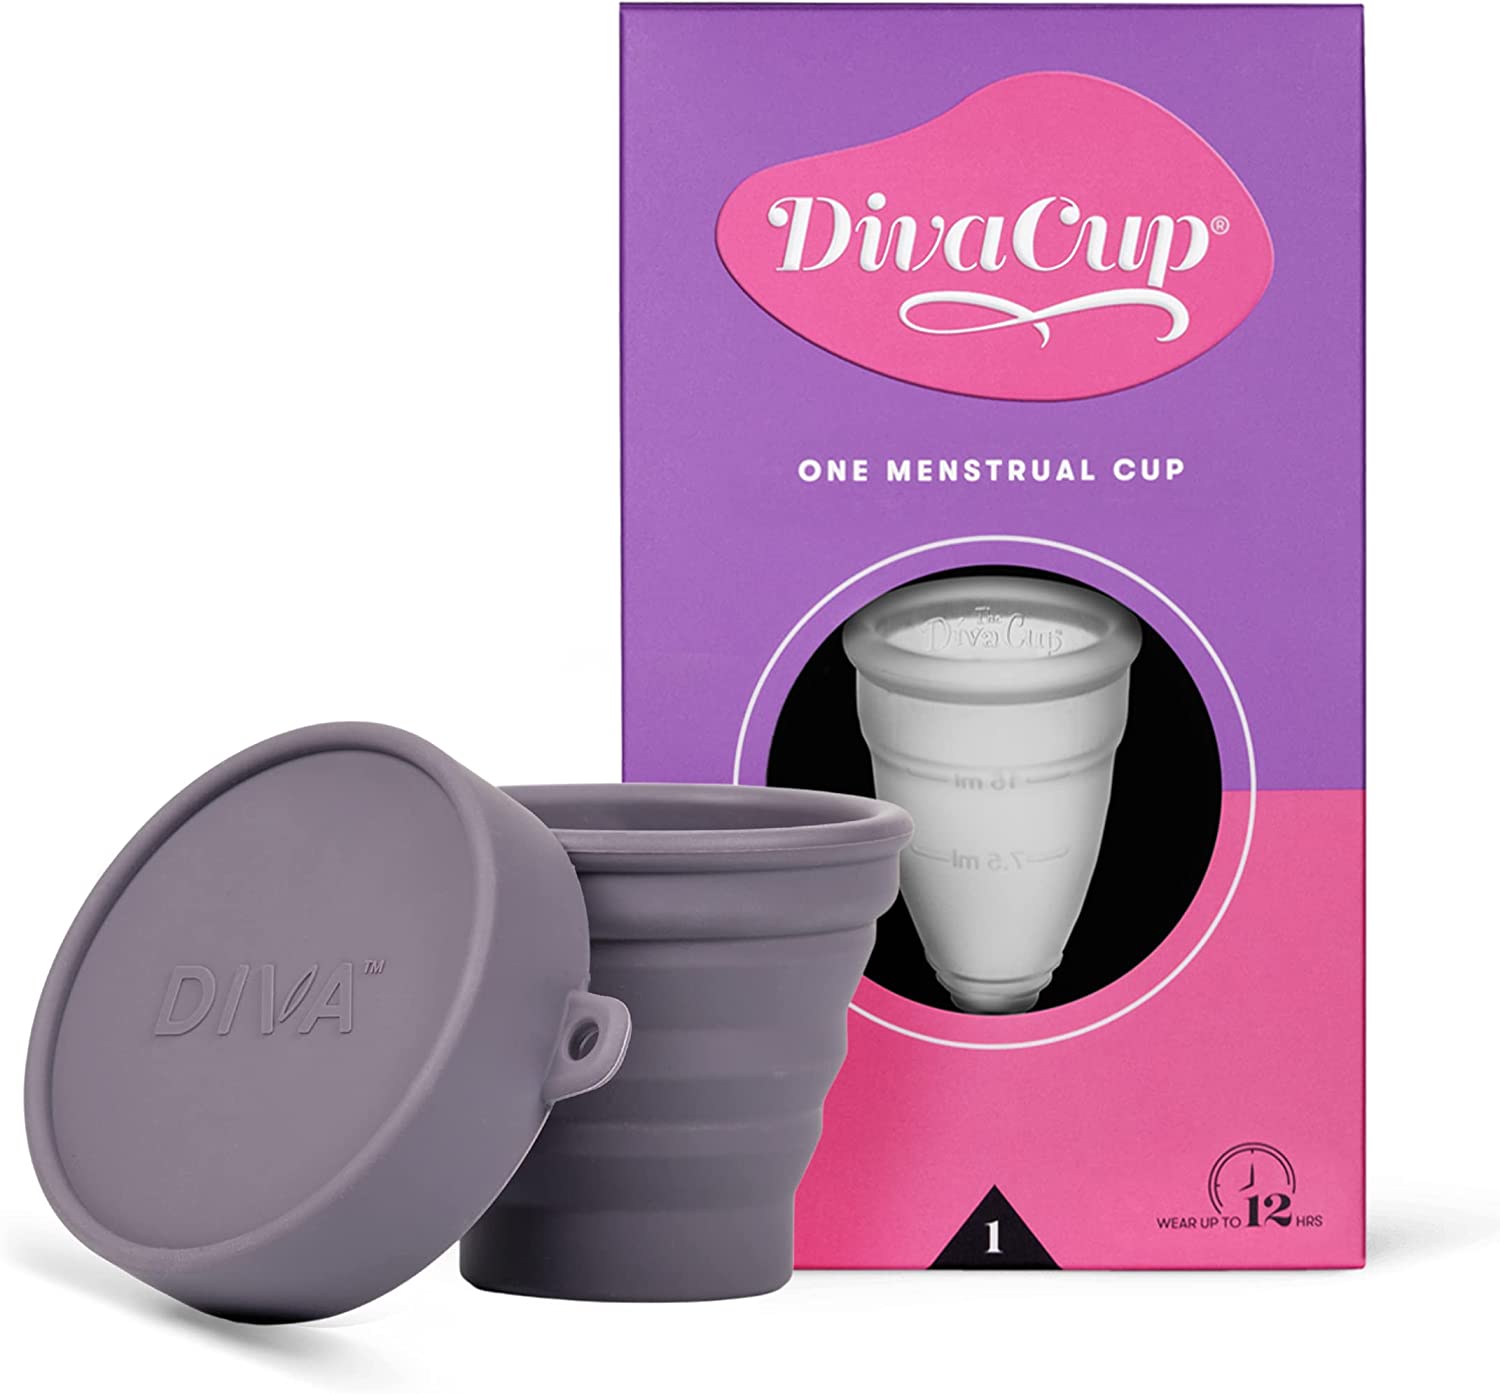 DivaCup size one Menstrual Cup